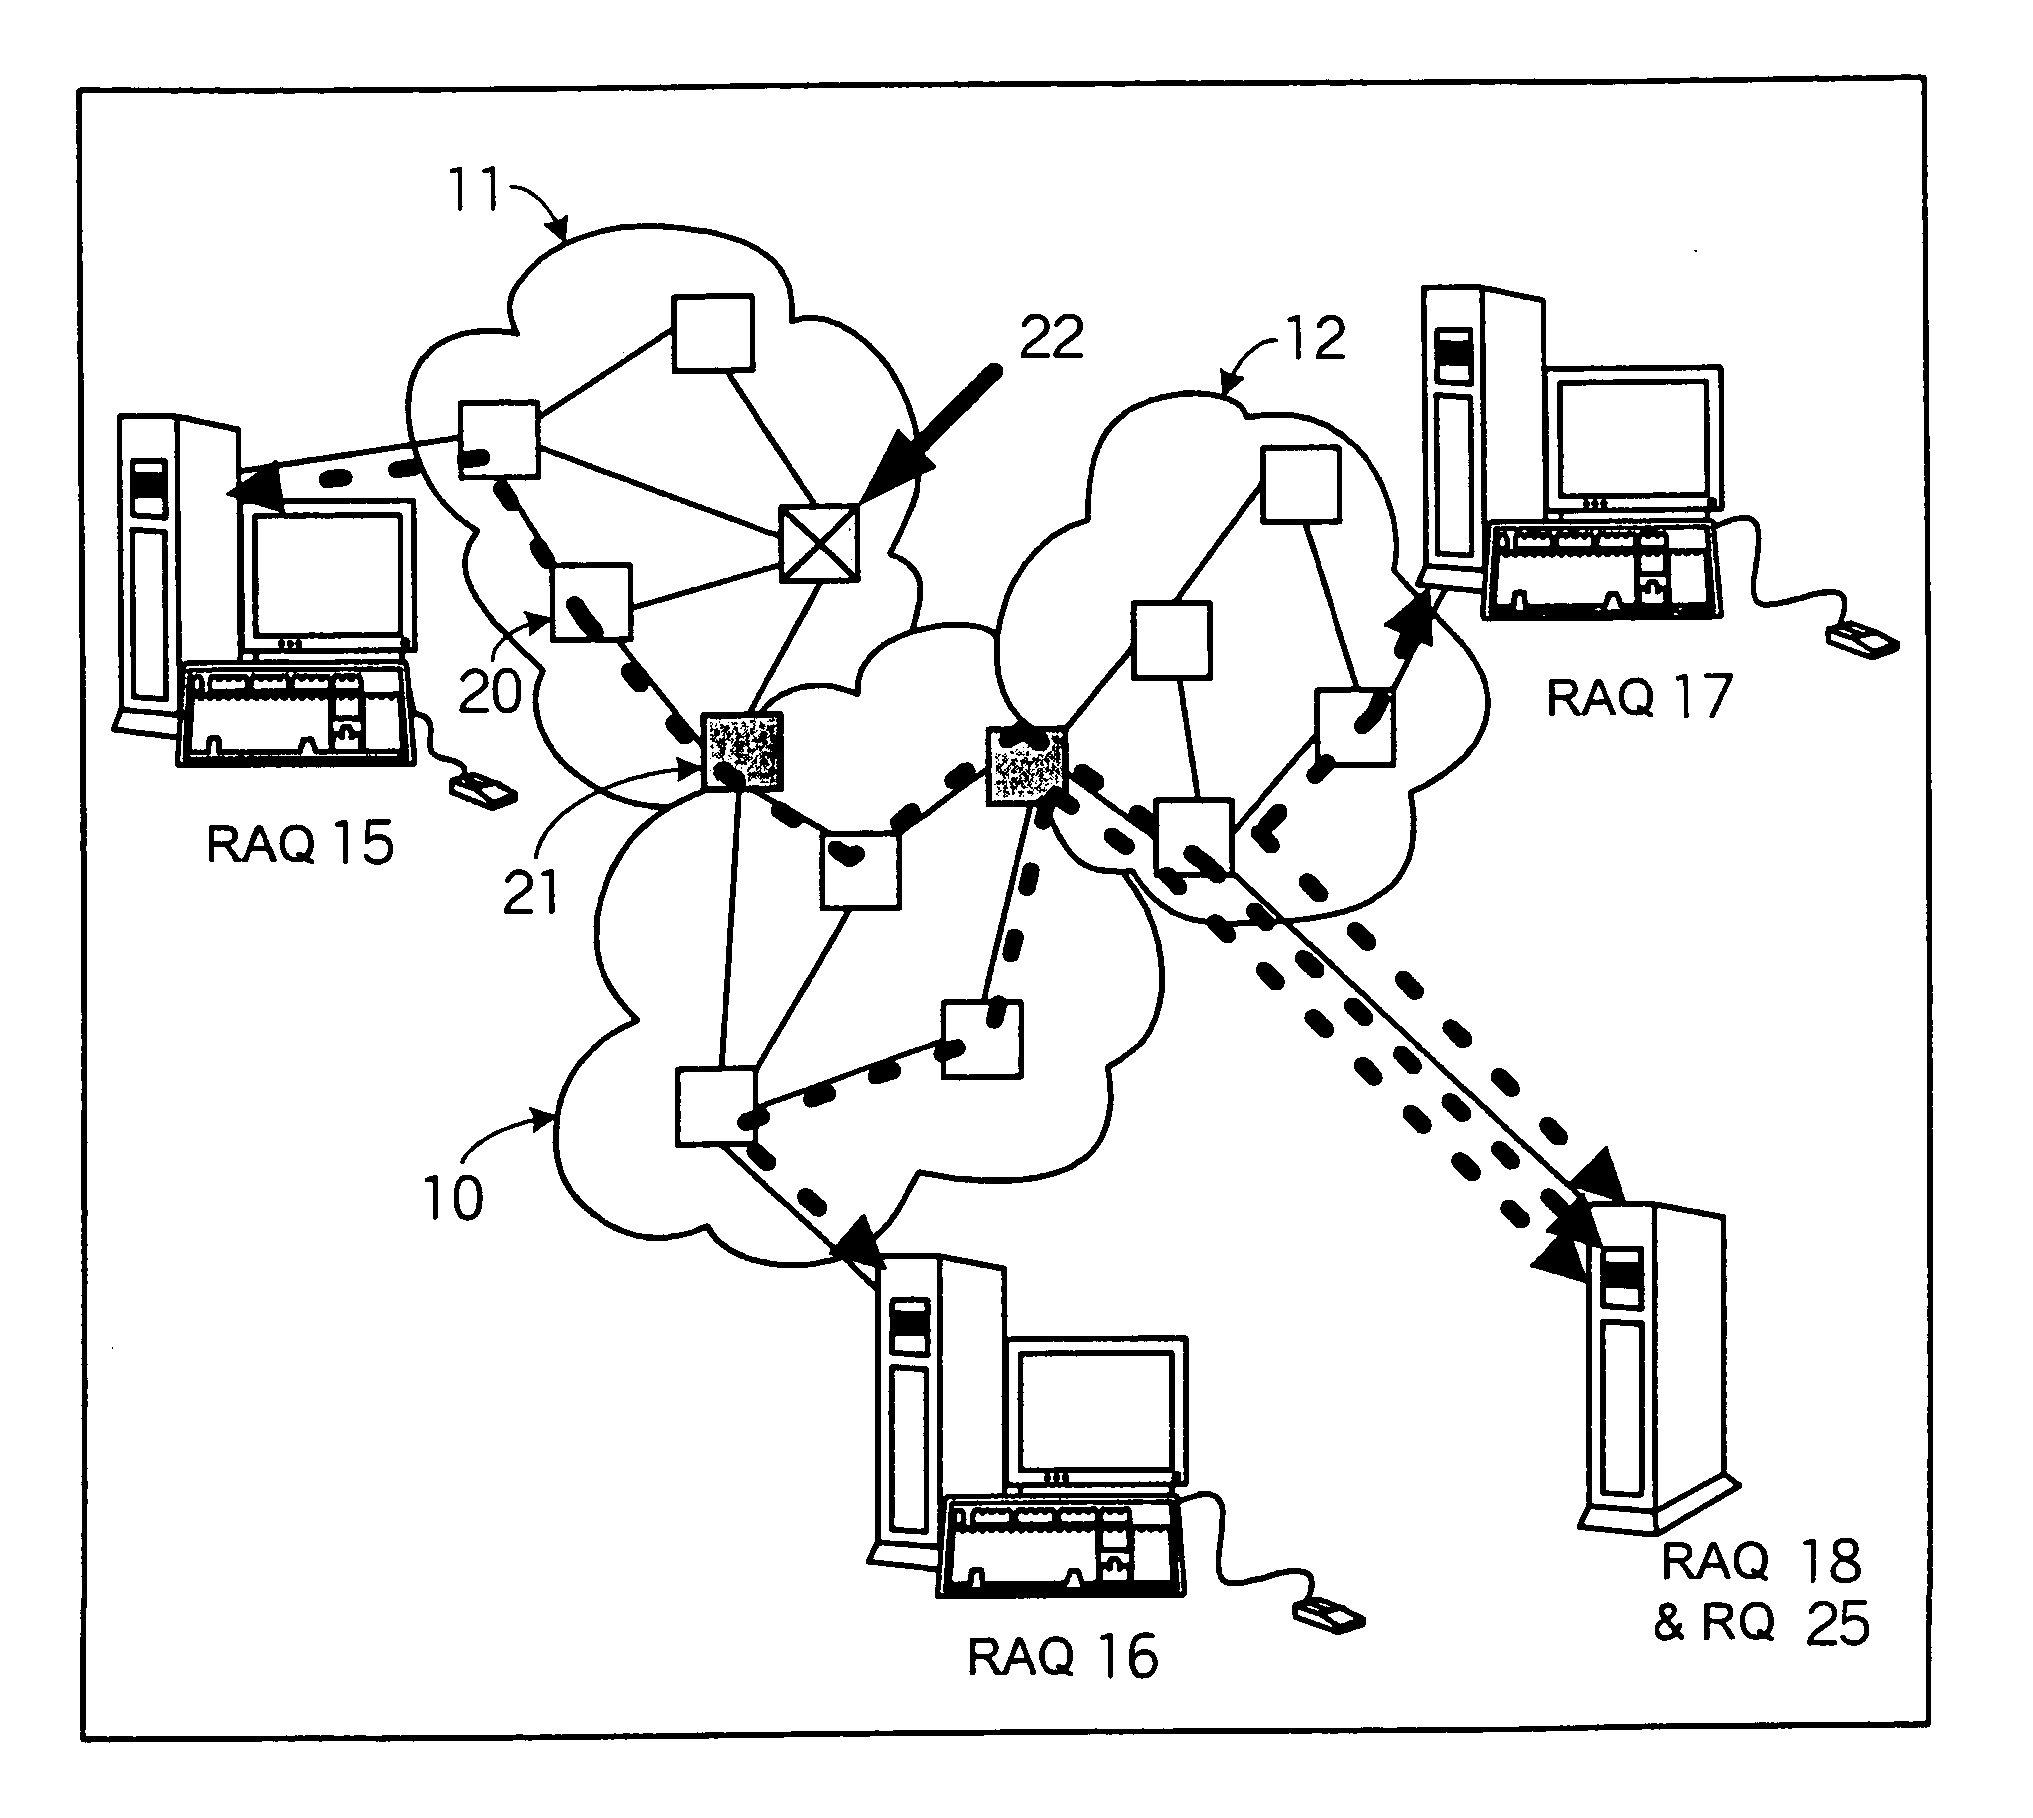 Method and system for path identification in packet networks